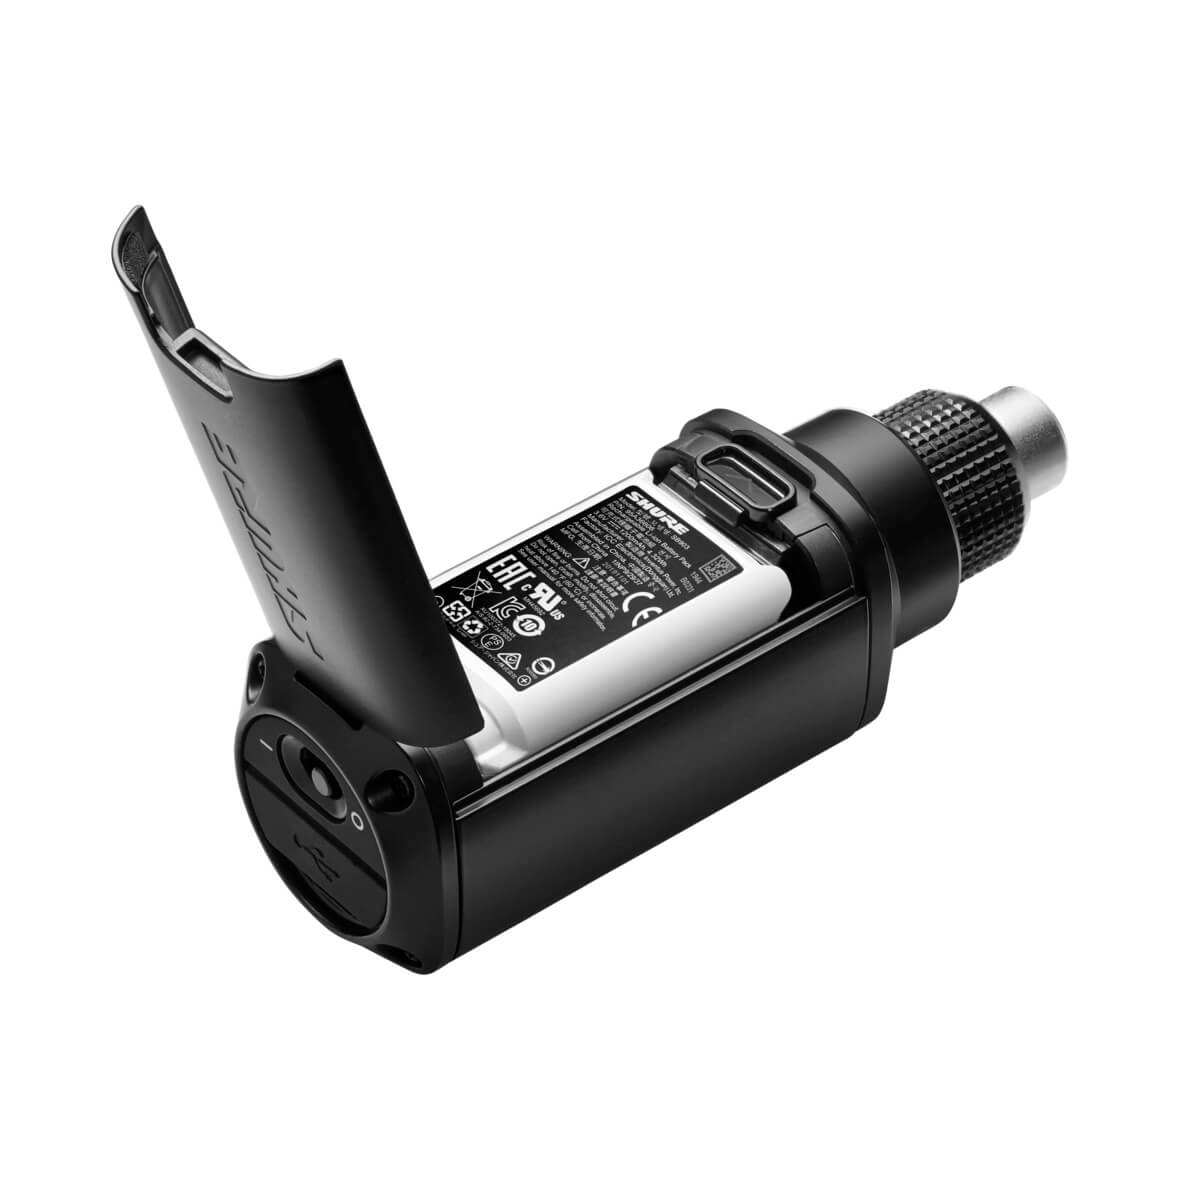 Shure SLXD3 - Plug-on Digital Wireless Transmitter with XLR Connector, shown with optional rechargeable battery